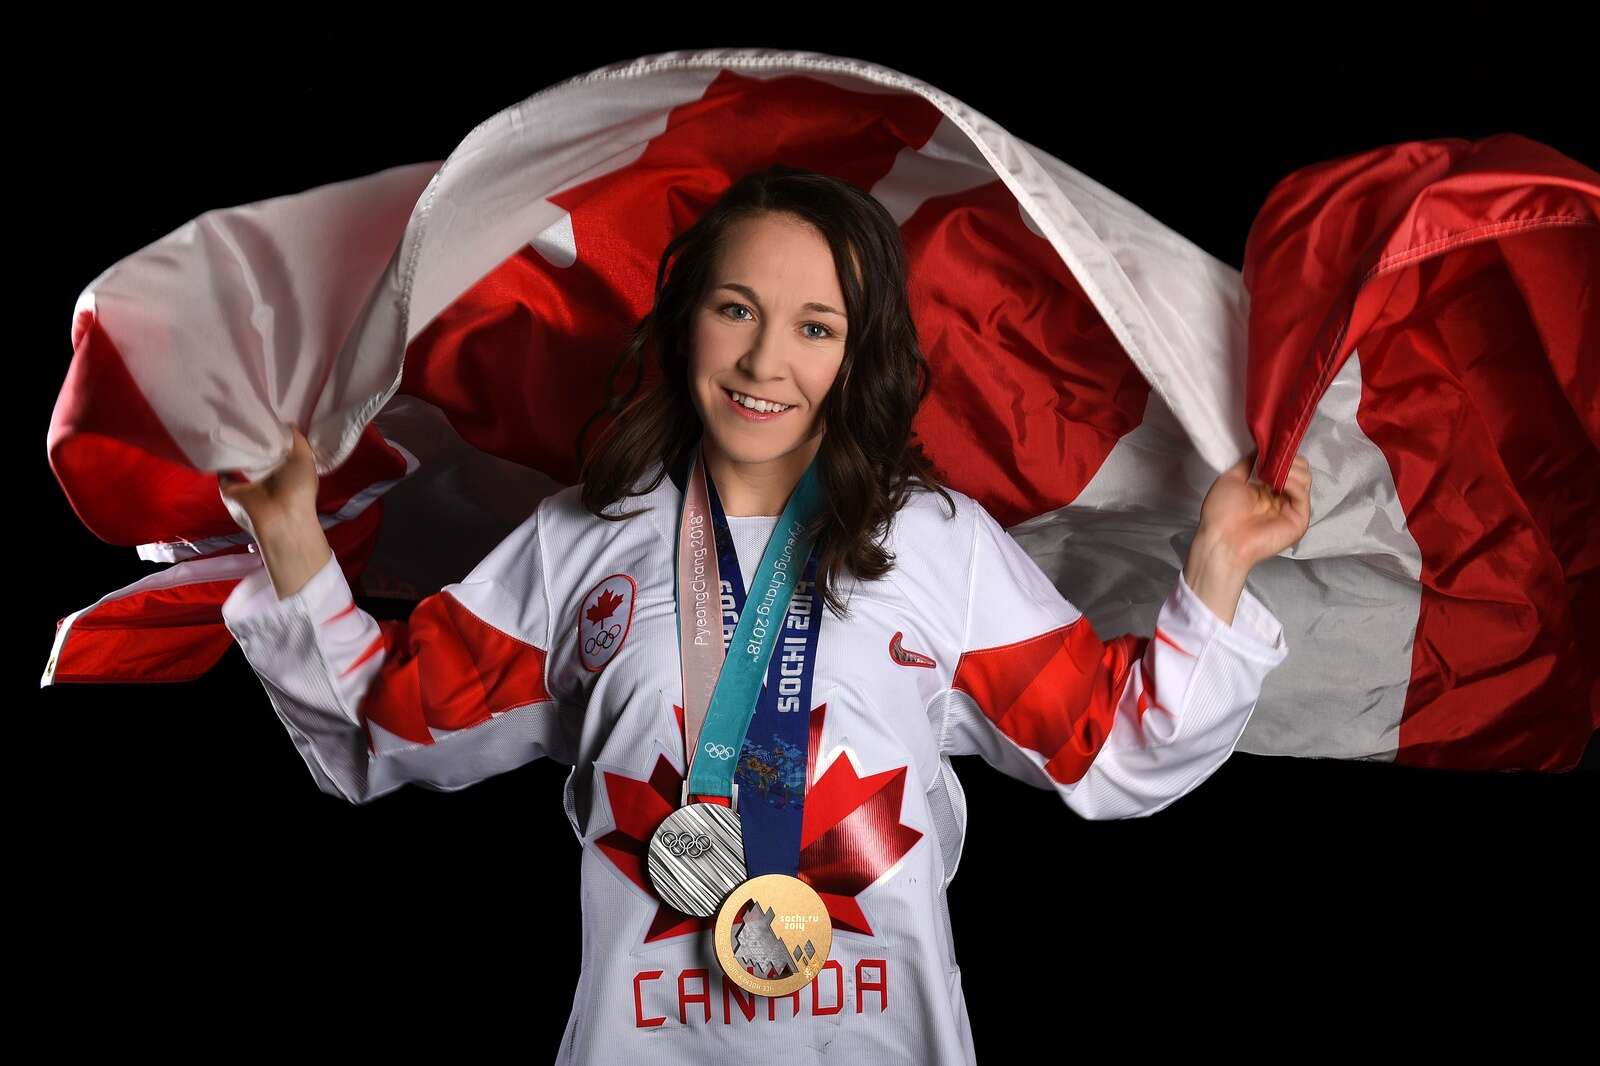 Canada closes Sochi Olympics with gold